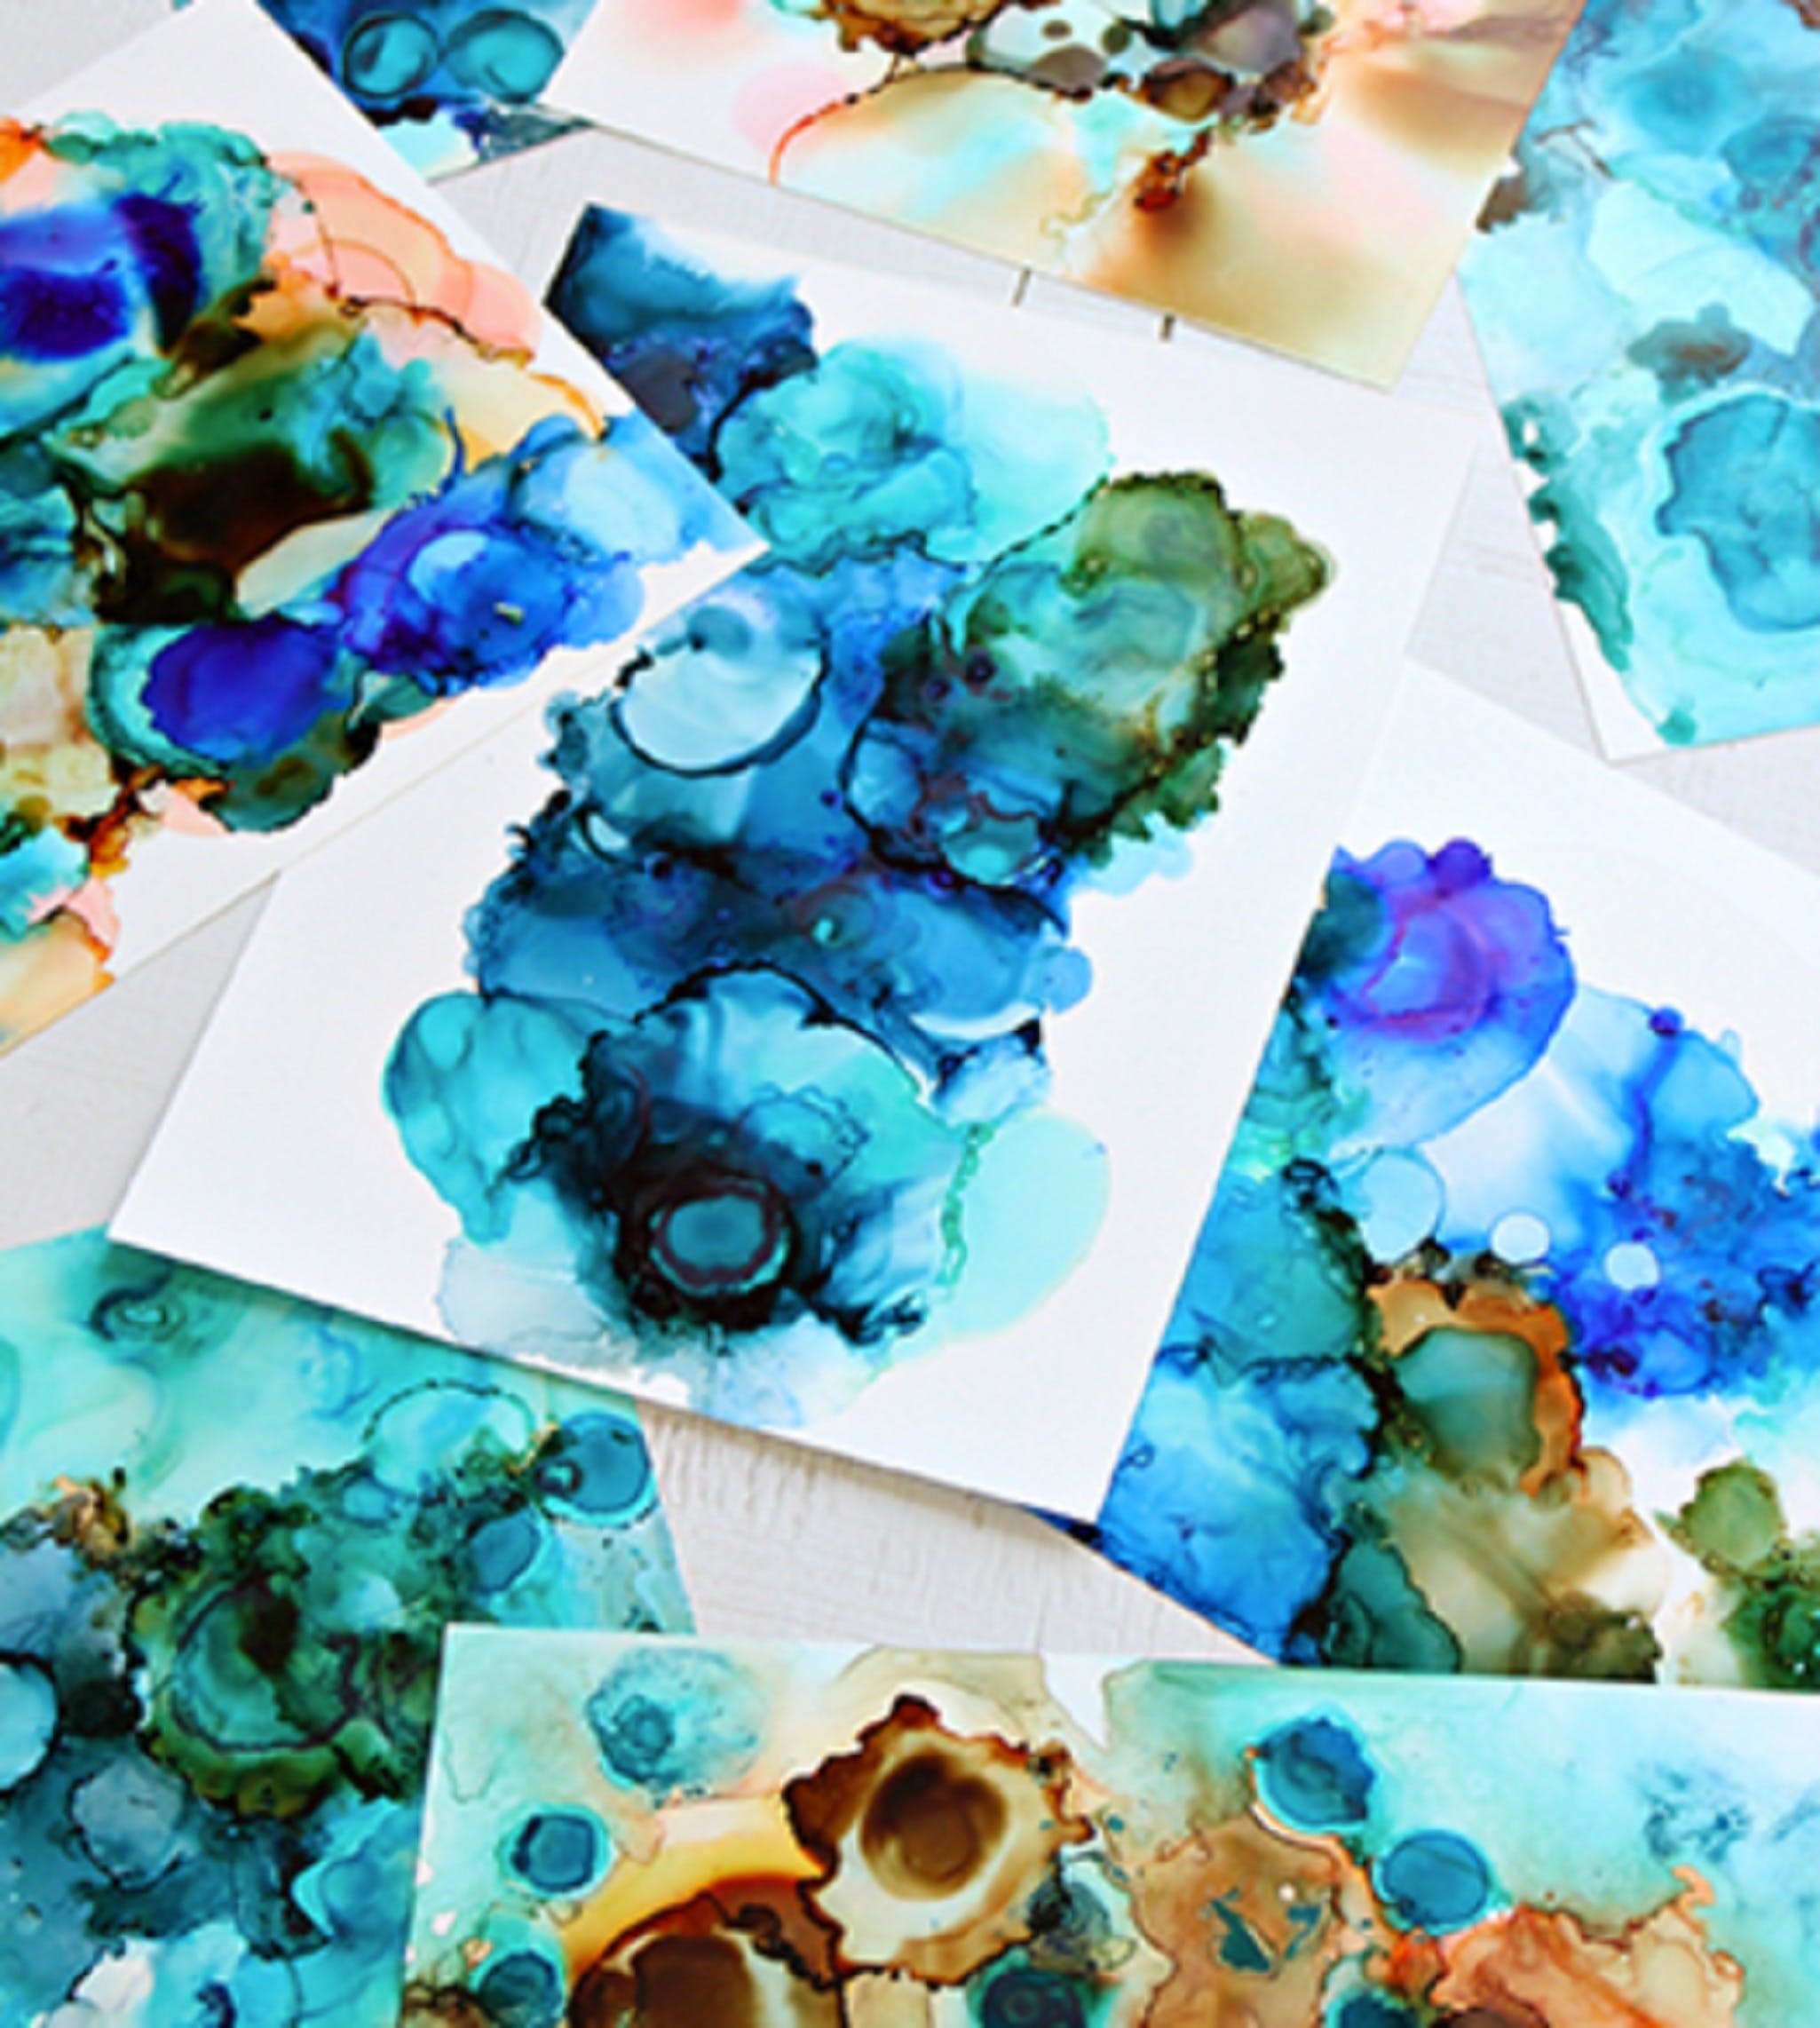 Alcohol Ink Art Class - 2032 Olympic Games